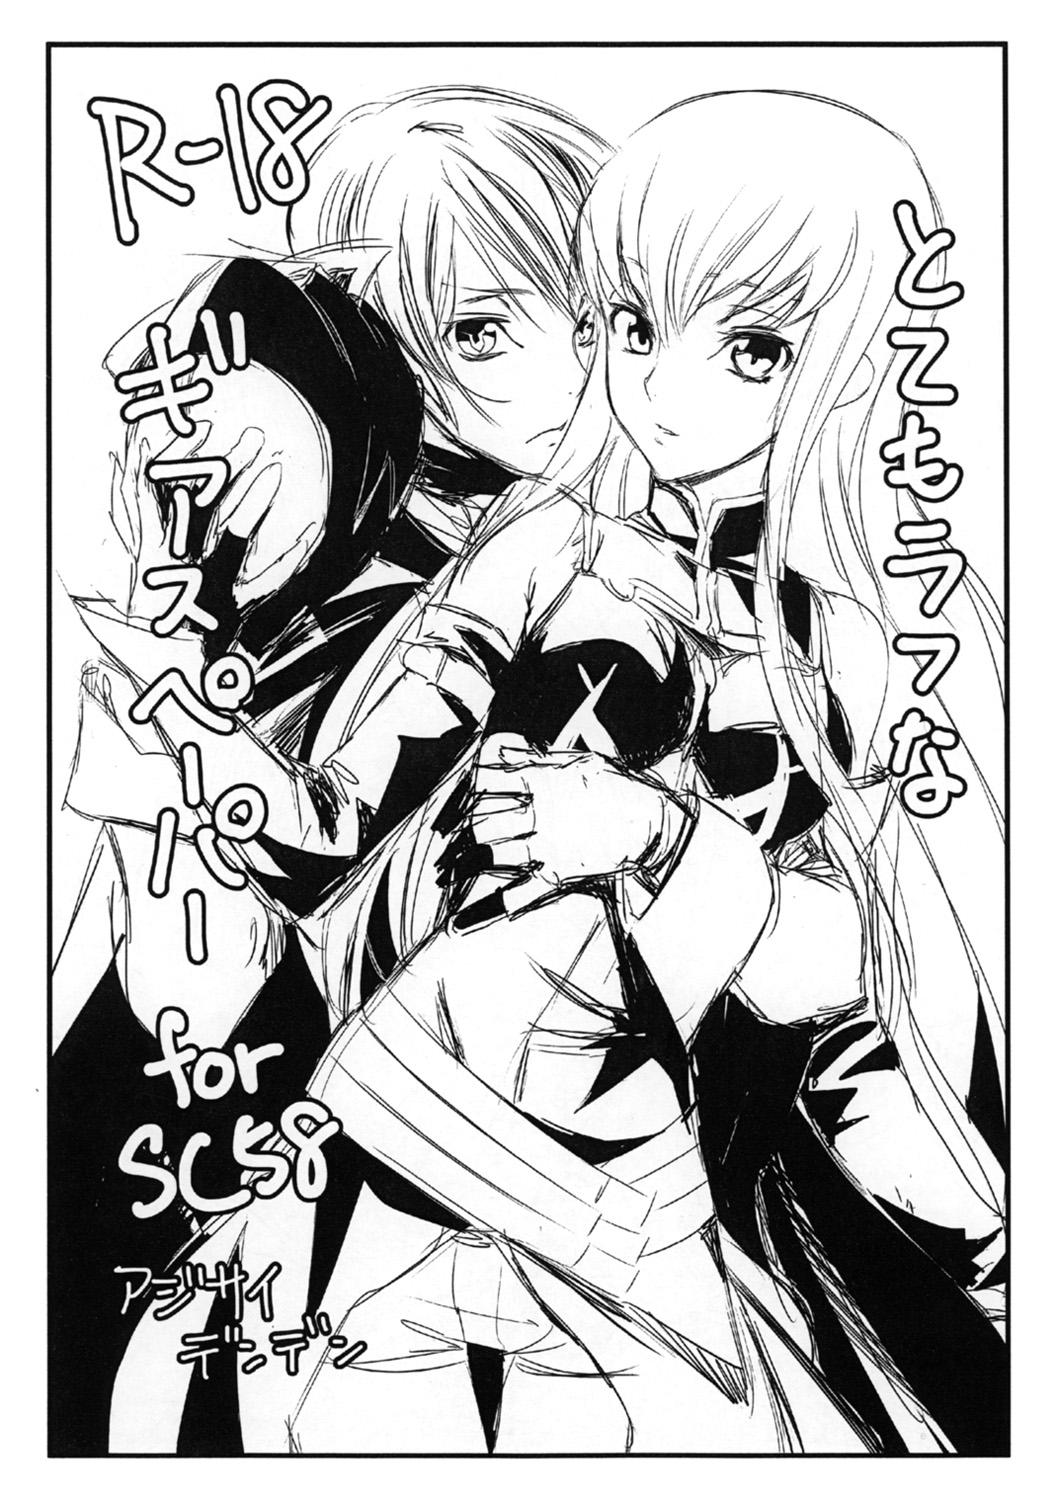 Ass Fetish Totemo Rough na Geass Paper for SC58 - Code geass Blackcocks - Page 1